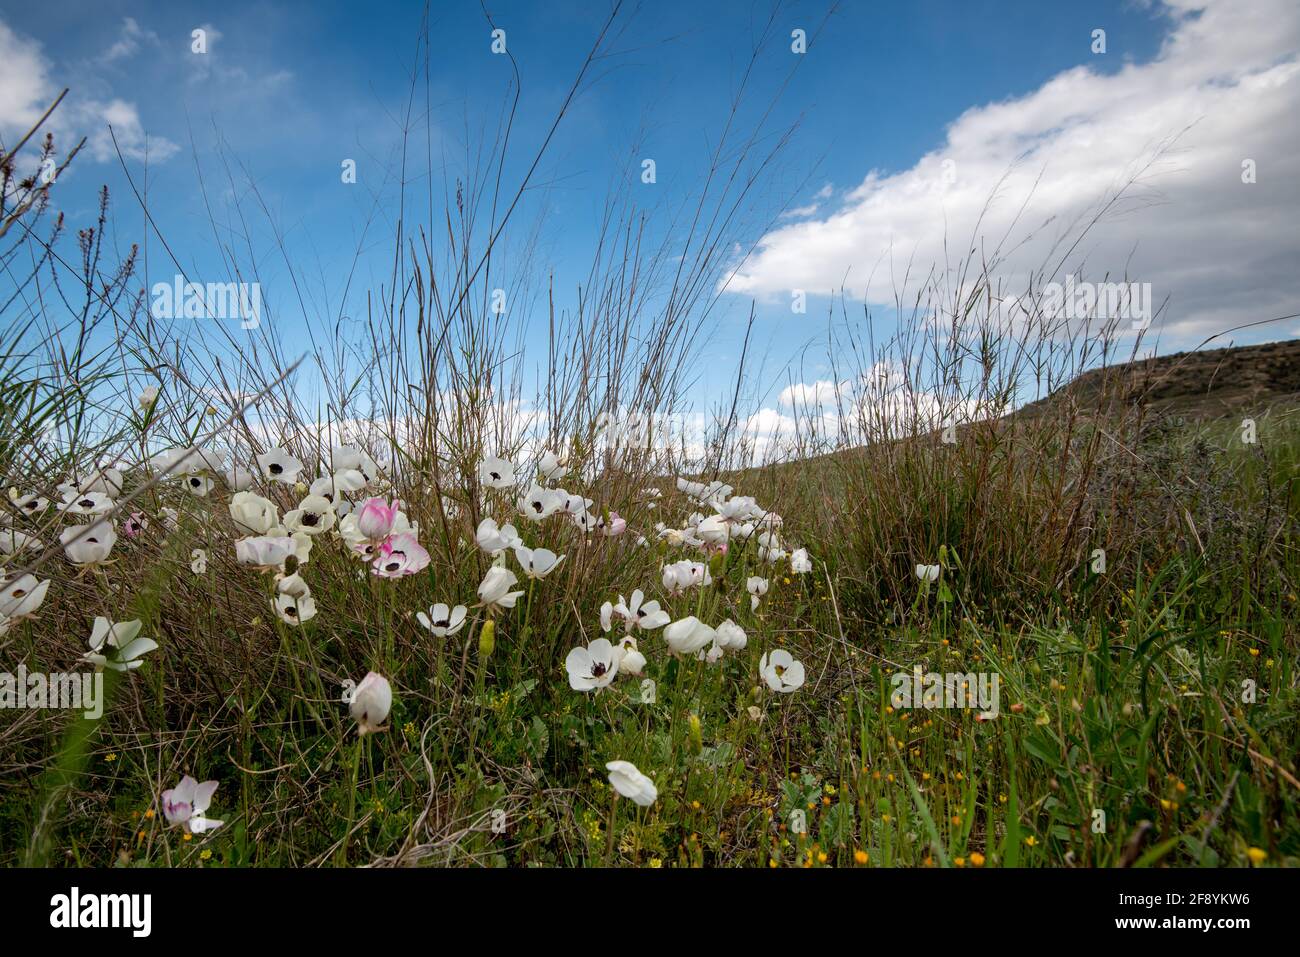 Blooming Poppy anemone flowers in spring. Springtime landscape Stock Photo